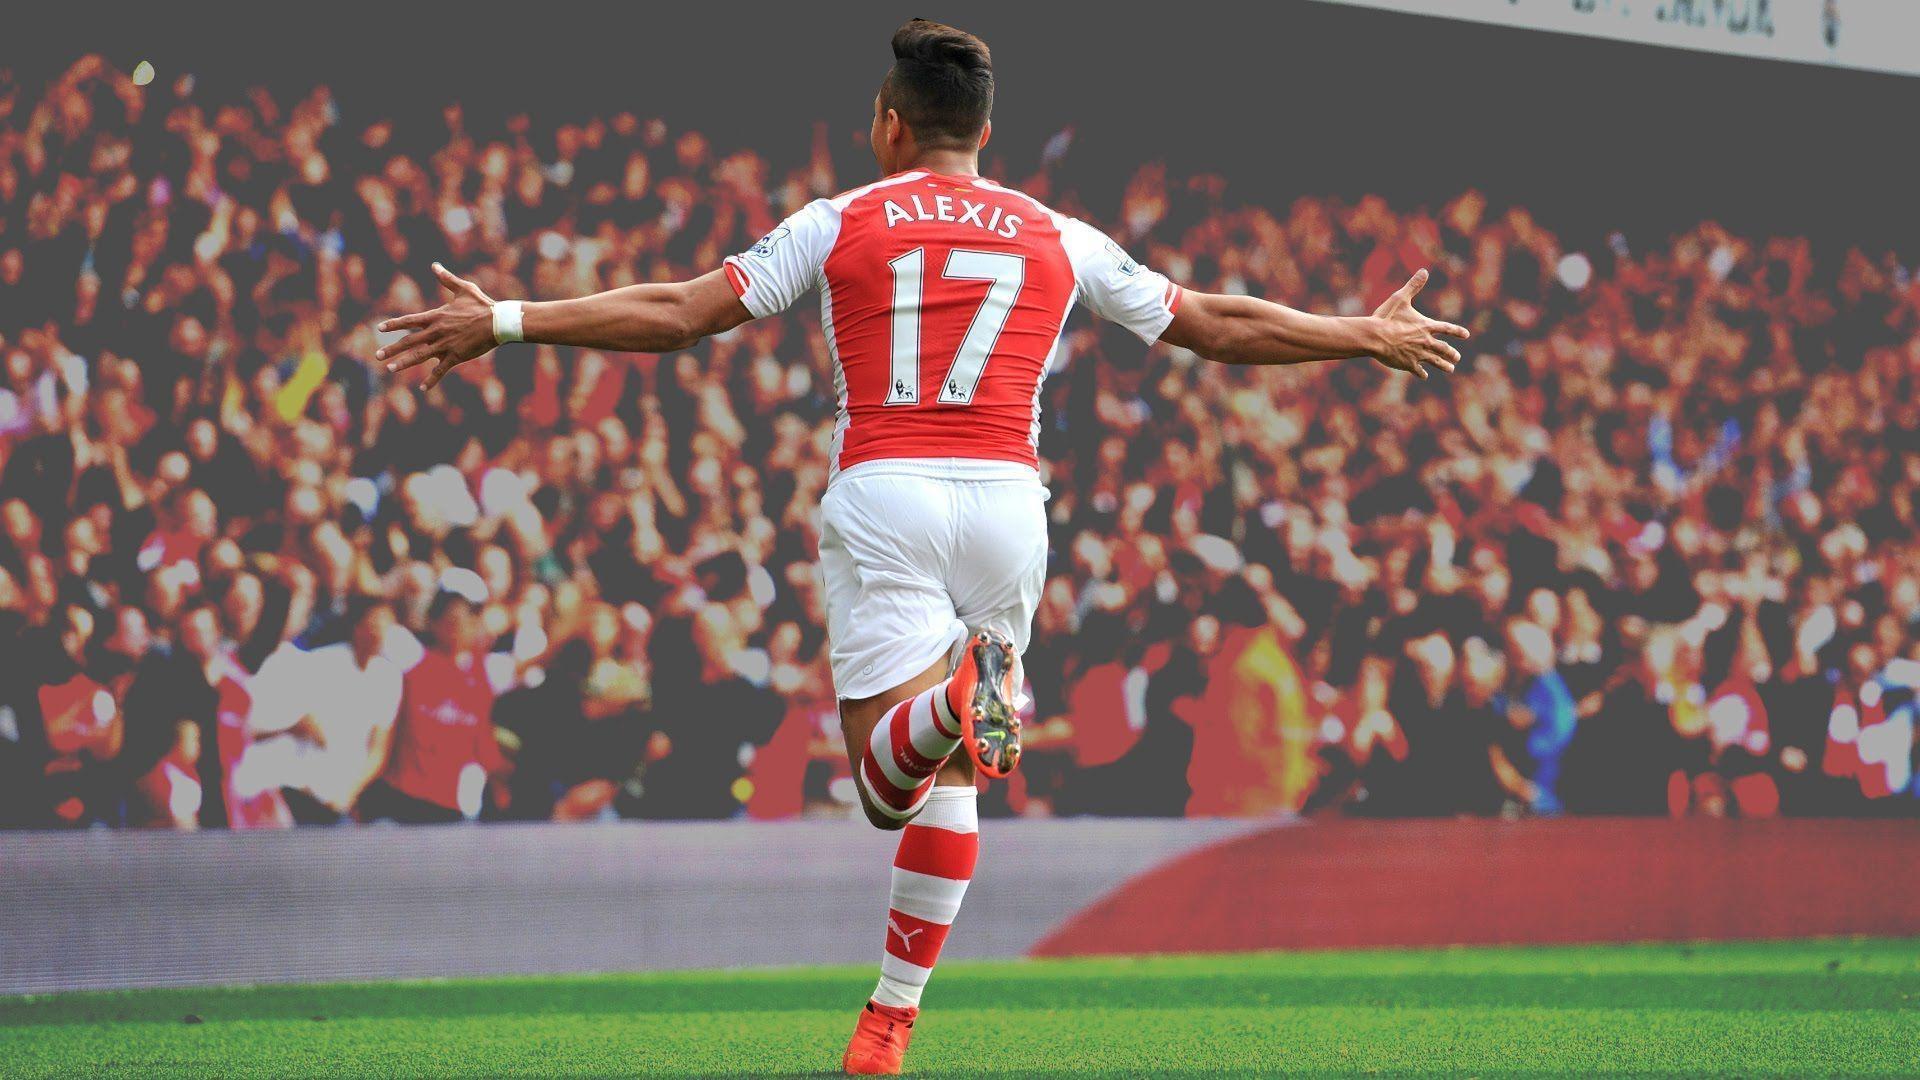 Alexis Sanchez Wallpaper High Resolution and Quality Download